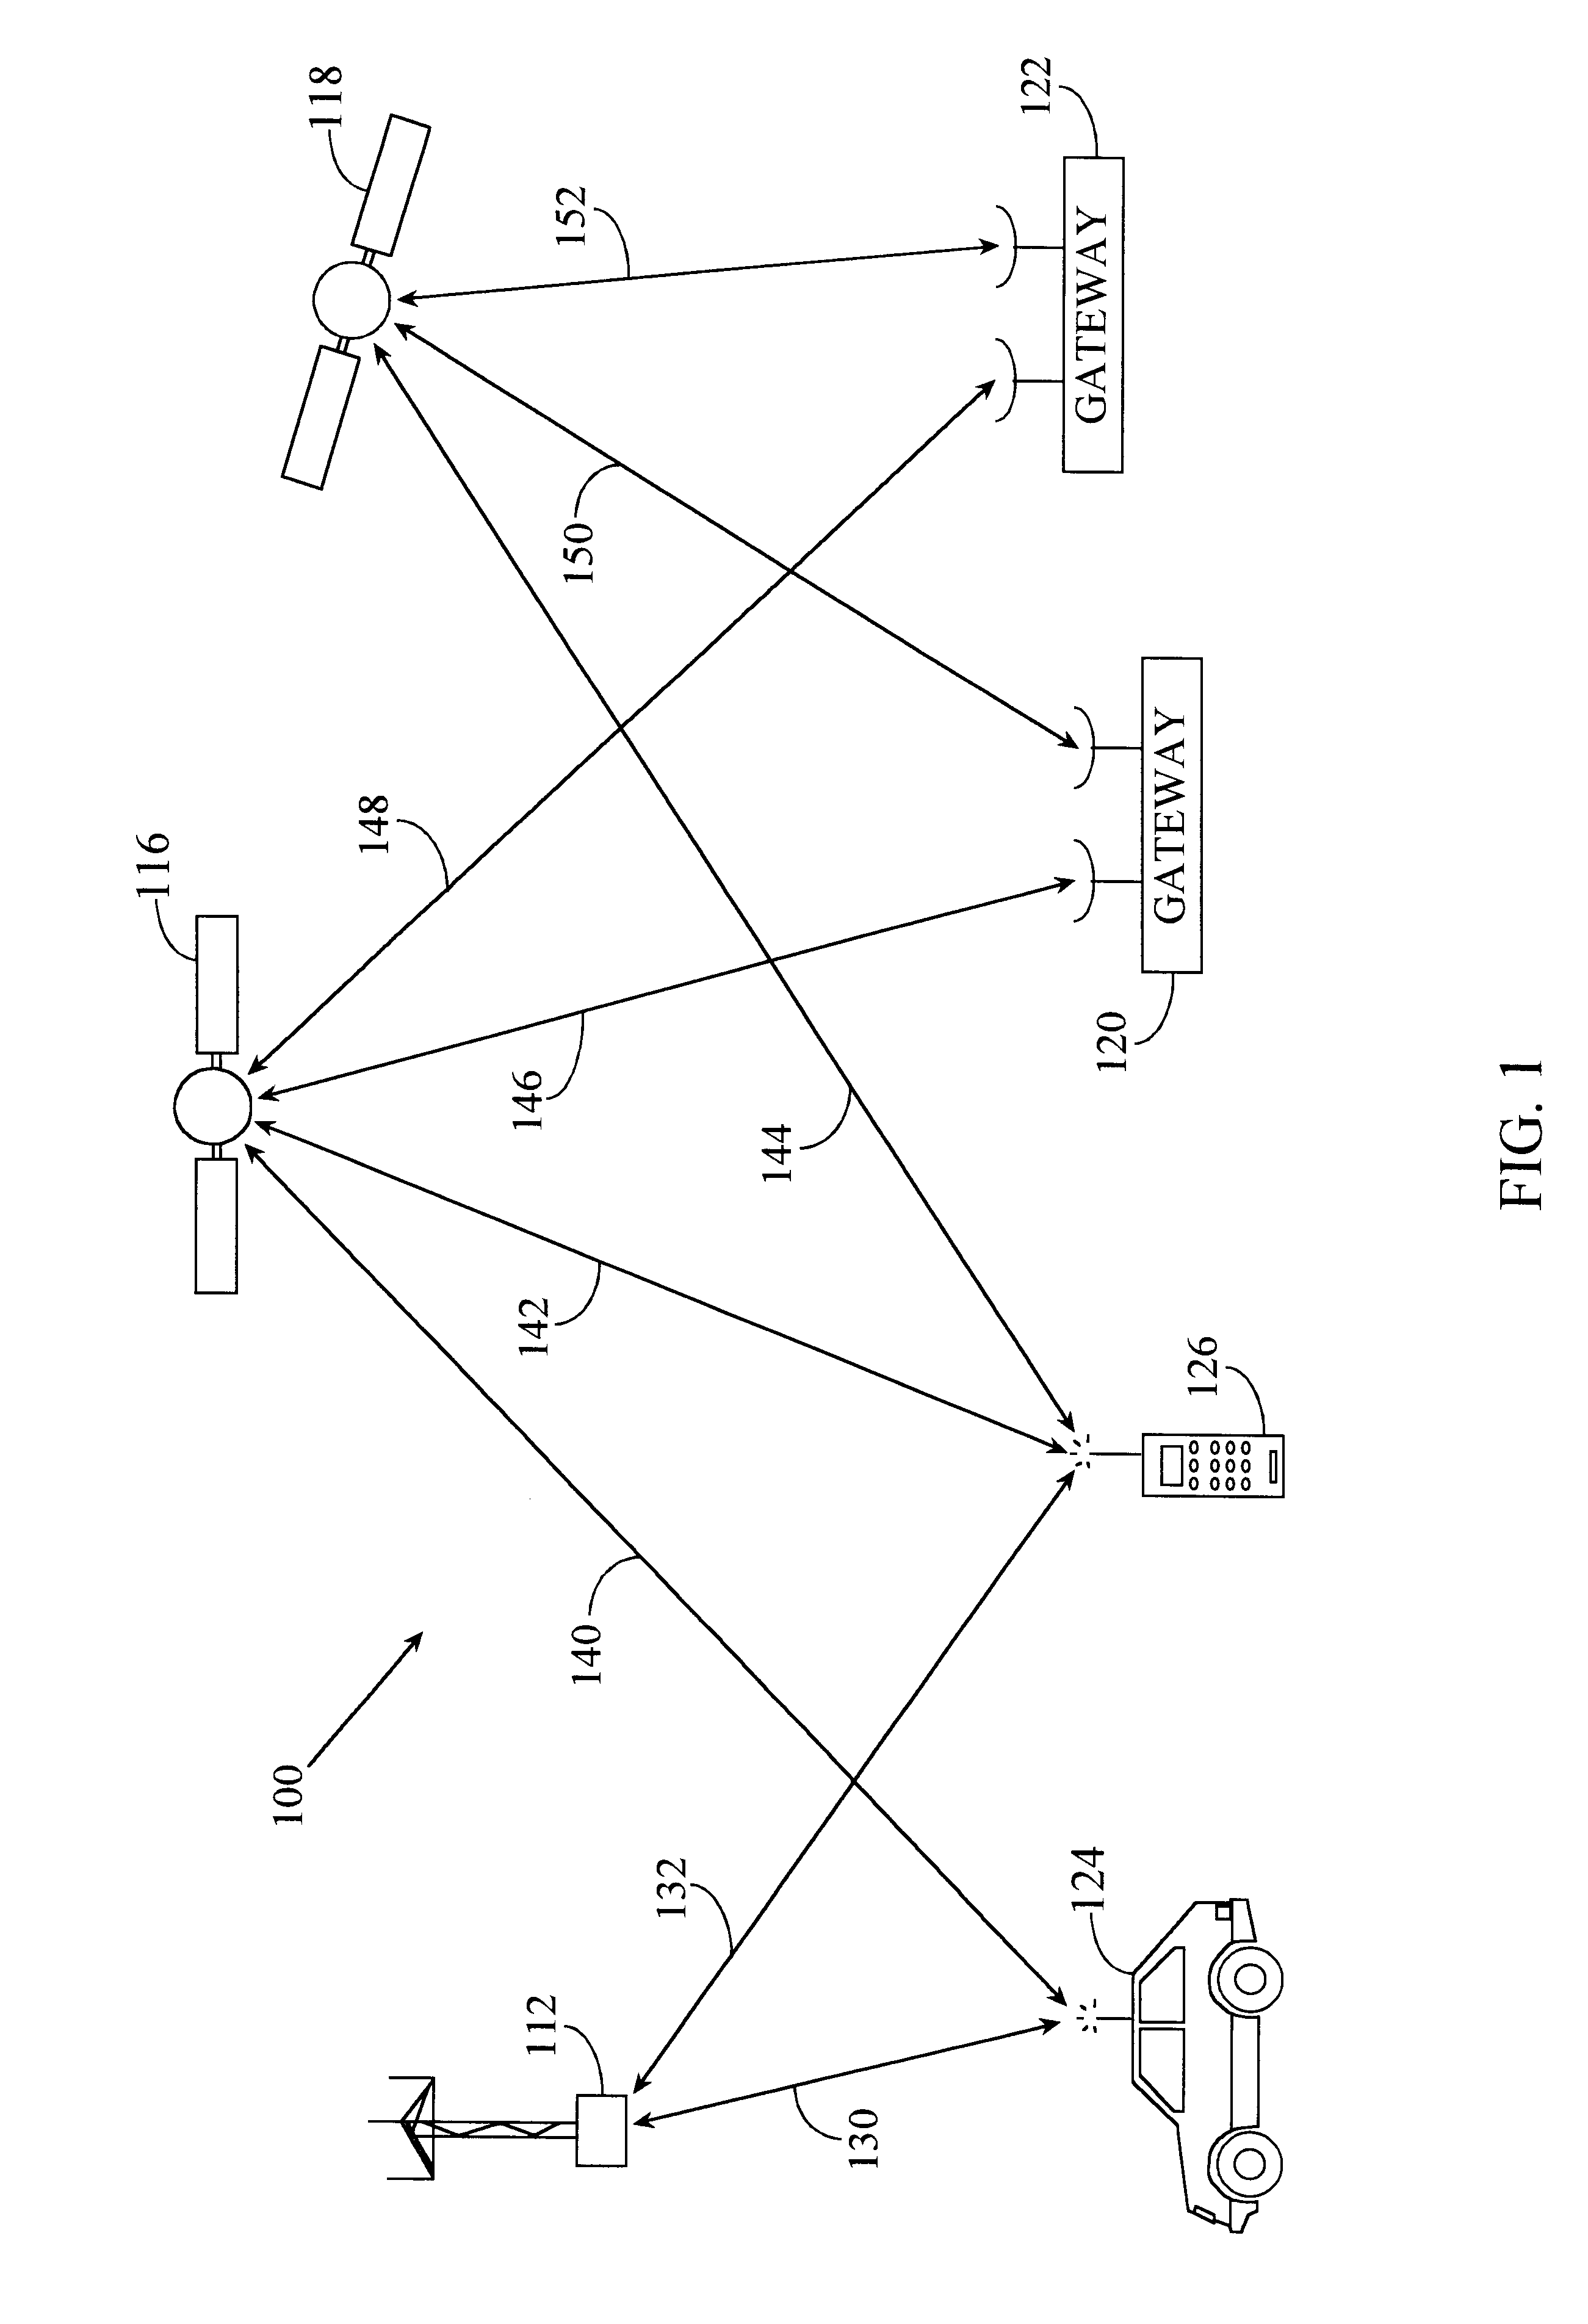 Method and apparatus for reducing frame error rate through signal power adjustment